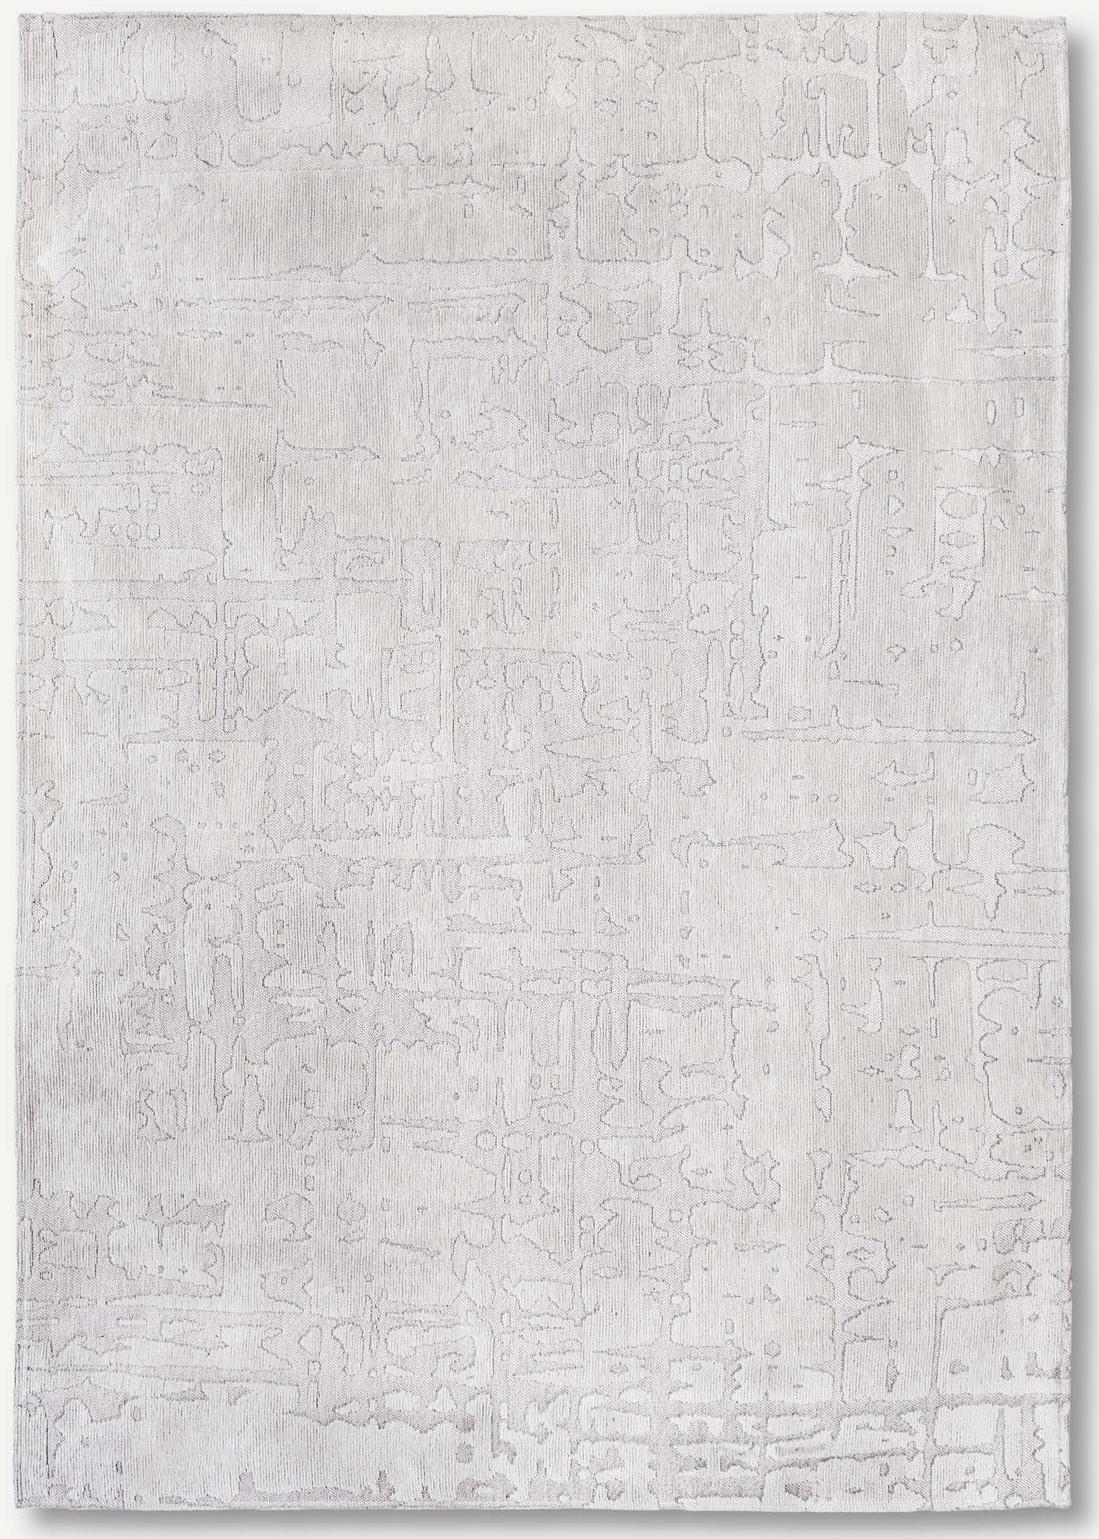 Abstract Silver Belgian Rug ☞ Size: 9' 2" x 13' (280 x 390 cm)